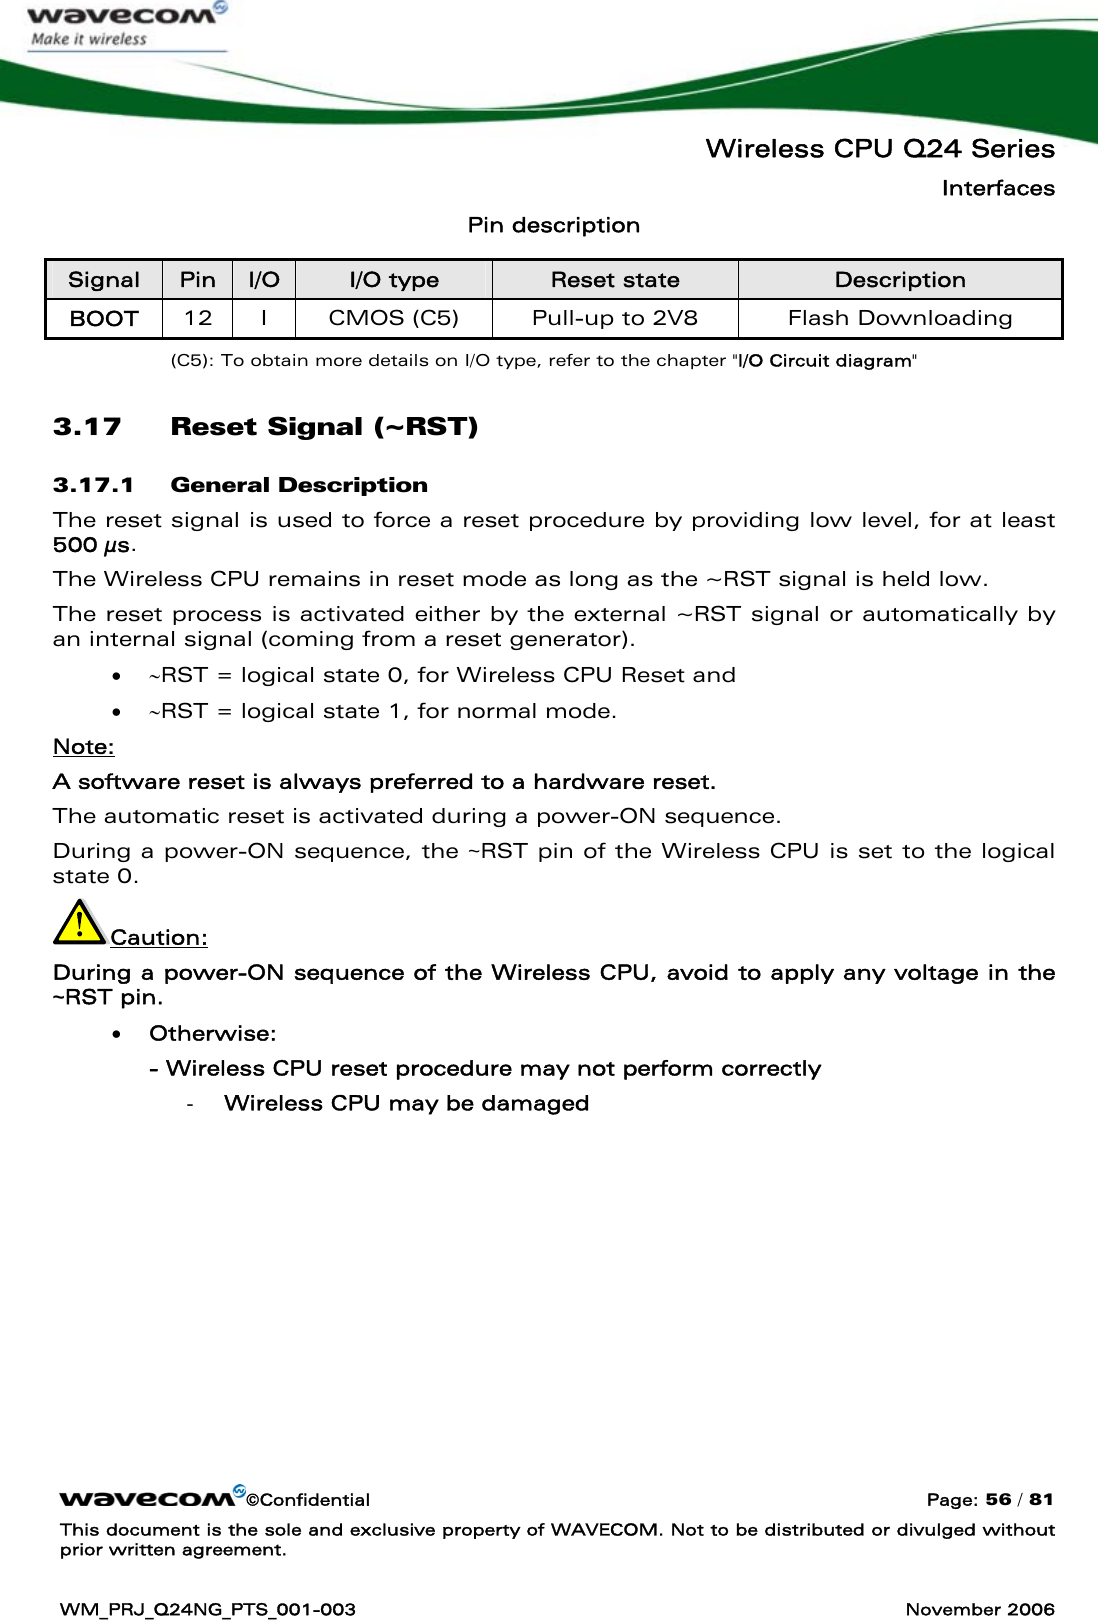   Wireless CPU Q24 Series Interfaces ©Confidential  Page: 56 / 81 This document is the sole and exclusive property of WAVECOM. Not to be distributed or divulged without prior written agreement.  WM_PRJ_Q24NG_PTS_001-003  November 2006  Pin description Signal  Pin  I/O  I/O type  Reset state  Description BOOT  12  I  CMOS (C5)  Pull-up to 2V8  Flash Downloading (C5): To obtain more details on I/O type, refer to the chapter &quot;I/O Circuit diagram&quot; 3.17 Reset Signal (~RST) 3.17.1 General Description The reset signal is used to force a reset procedure by providing low level, for at least 500 μs. The Wireless CPU remains in reset mode as long as the ~RST signal is held low. The reset process is activated either by the external ~RST signal or automatically by an internal signal (coming from a reset generator).  • ∼RST = logical state 0, for Wireless CPU Reset and • ∼RST = logical state 1, for normal mode. Note:  A software reset is always preferred to a hardware reset. The automatic reset is activated during a power-ON sequence. During a power-ON sequence, the ~RST pin of the Wireless CPU is set to the logical state 0. Caution:  During a power-ON sequence of the Wireless CPU, avoid to apply any voltage in the ~RST pin.  • Otherwise: - Wireless CPU reset procedure may not perform correctly - Wireless CPU may be damaged  